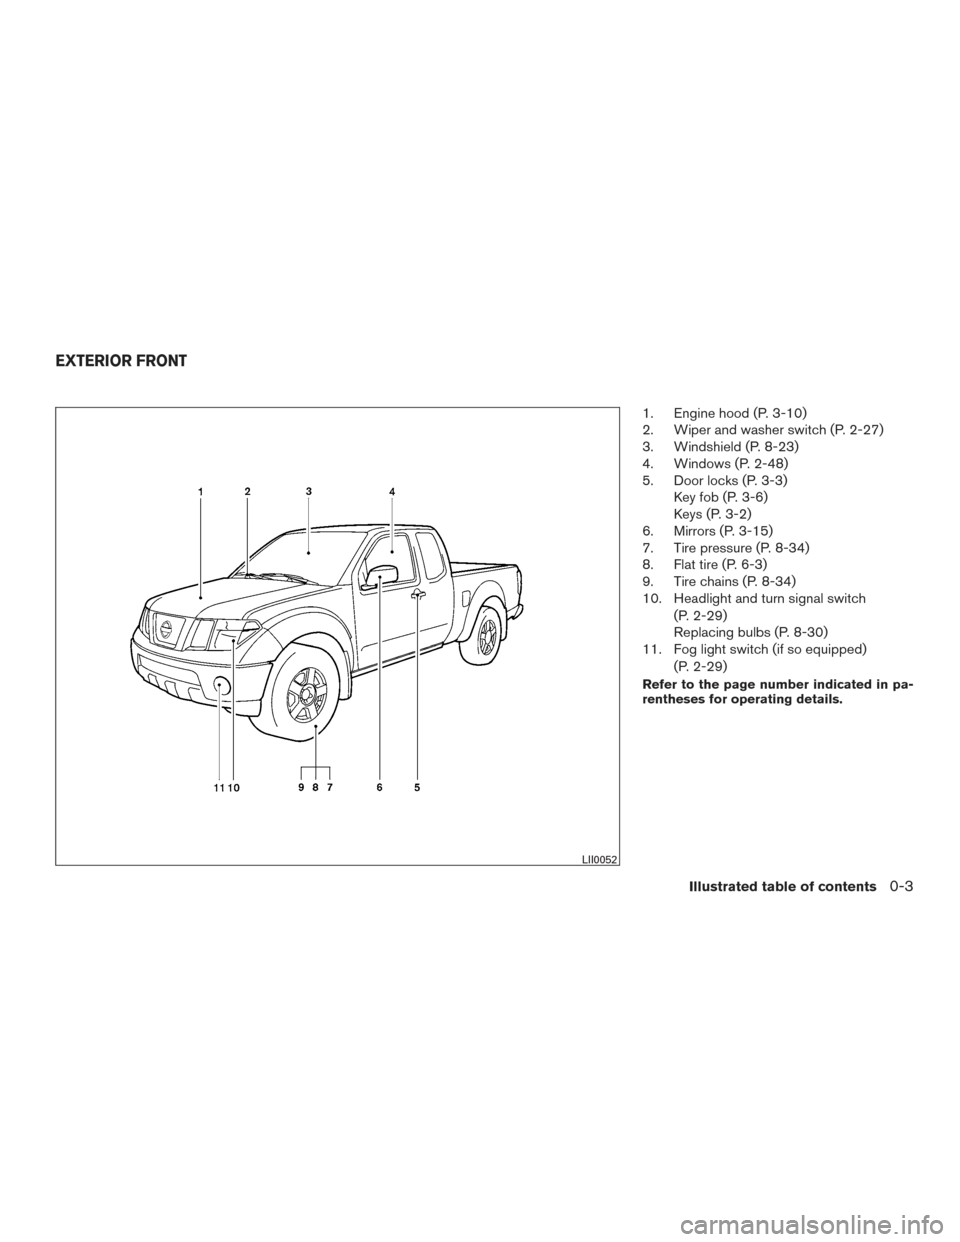 NISSAN FRONTIER 2016 D23 / 3.G User Guide 1. Engine hood (P. 3-10)
2. Wiper and washer switch (P. 2-27)
3. Windshield (P. 8-23)
4. Windows (P. 2-48)
5. Door locks (P. 3-3)Key fob (P. 3-6)
Keys (P. 3-2)
6. Mirrors (P. 3-15)
7. Tire pressure (P